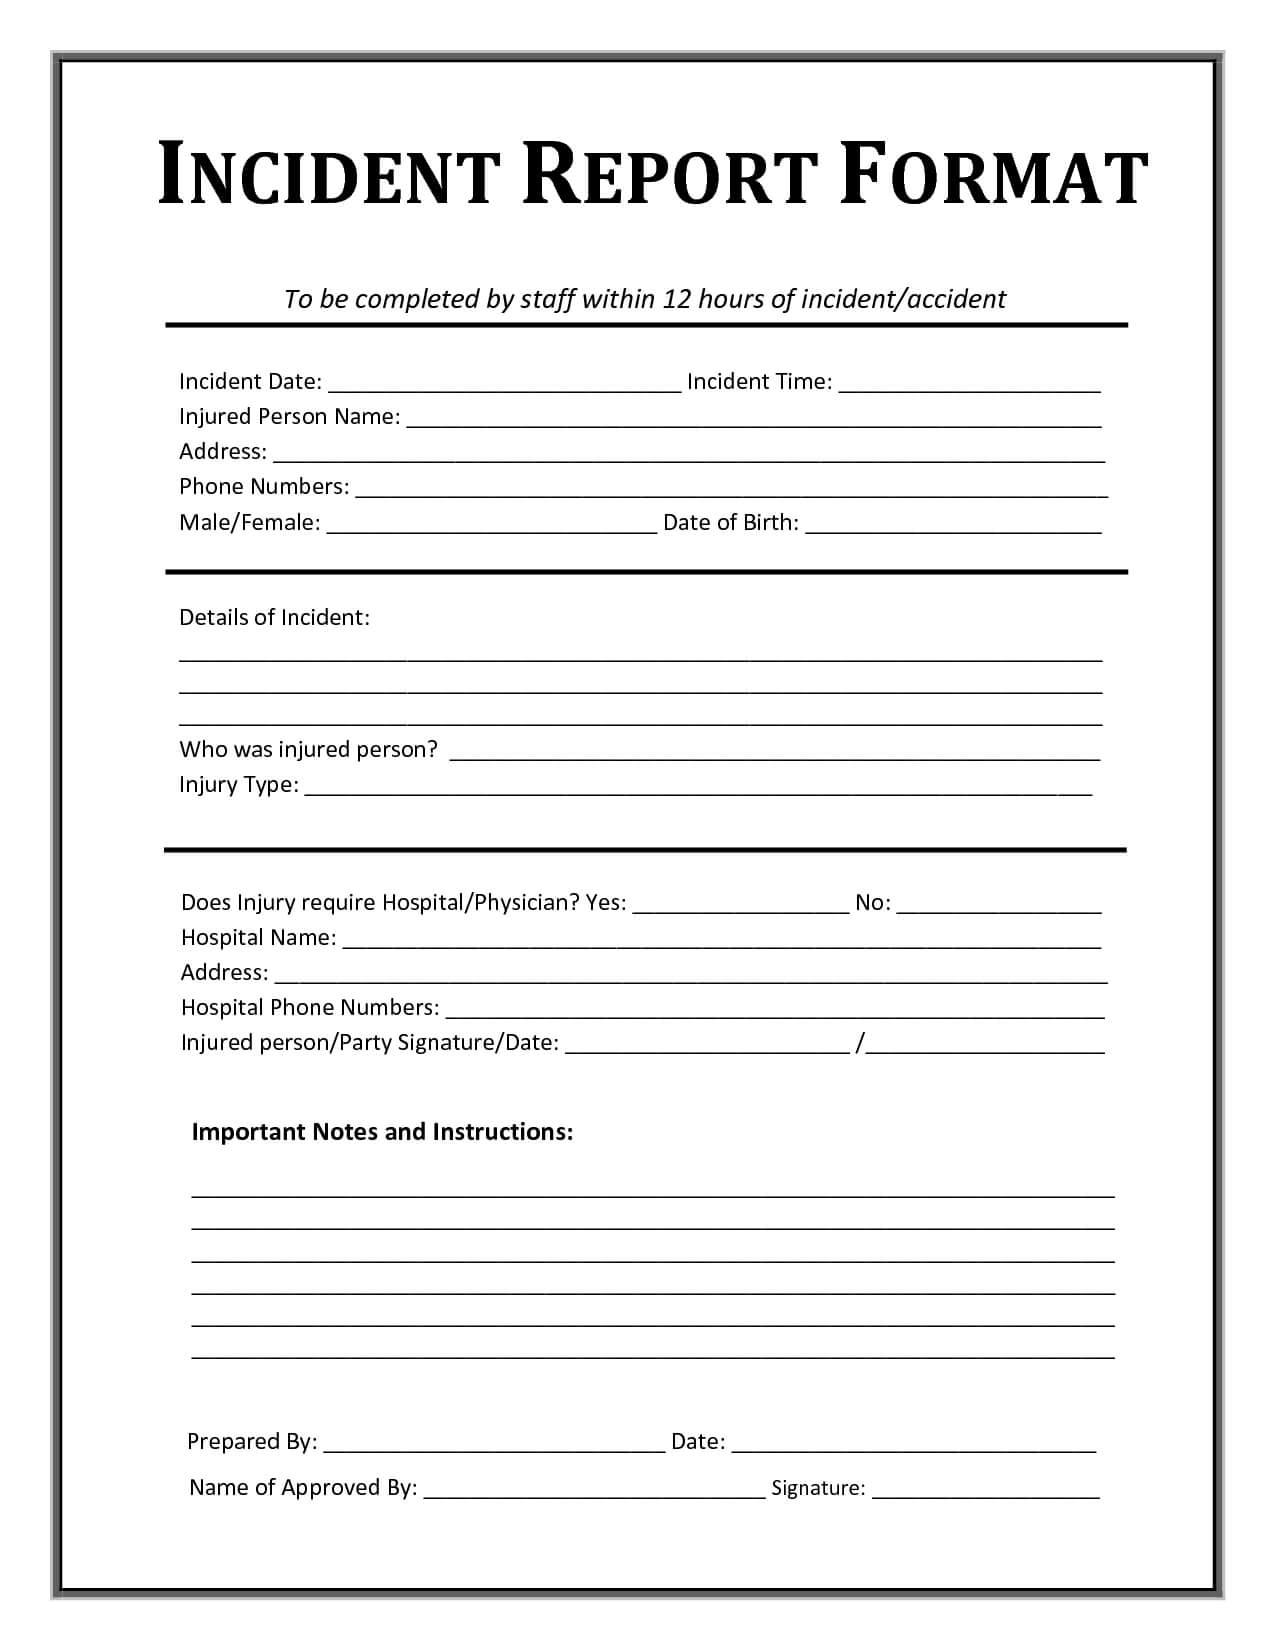 Incident Report Template | Incident Report Form, Incident With Incident Report Template Uk